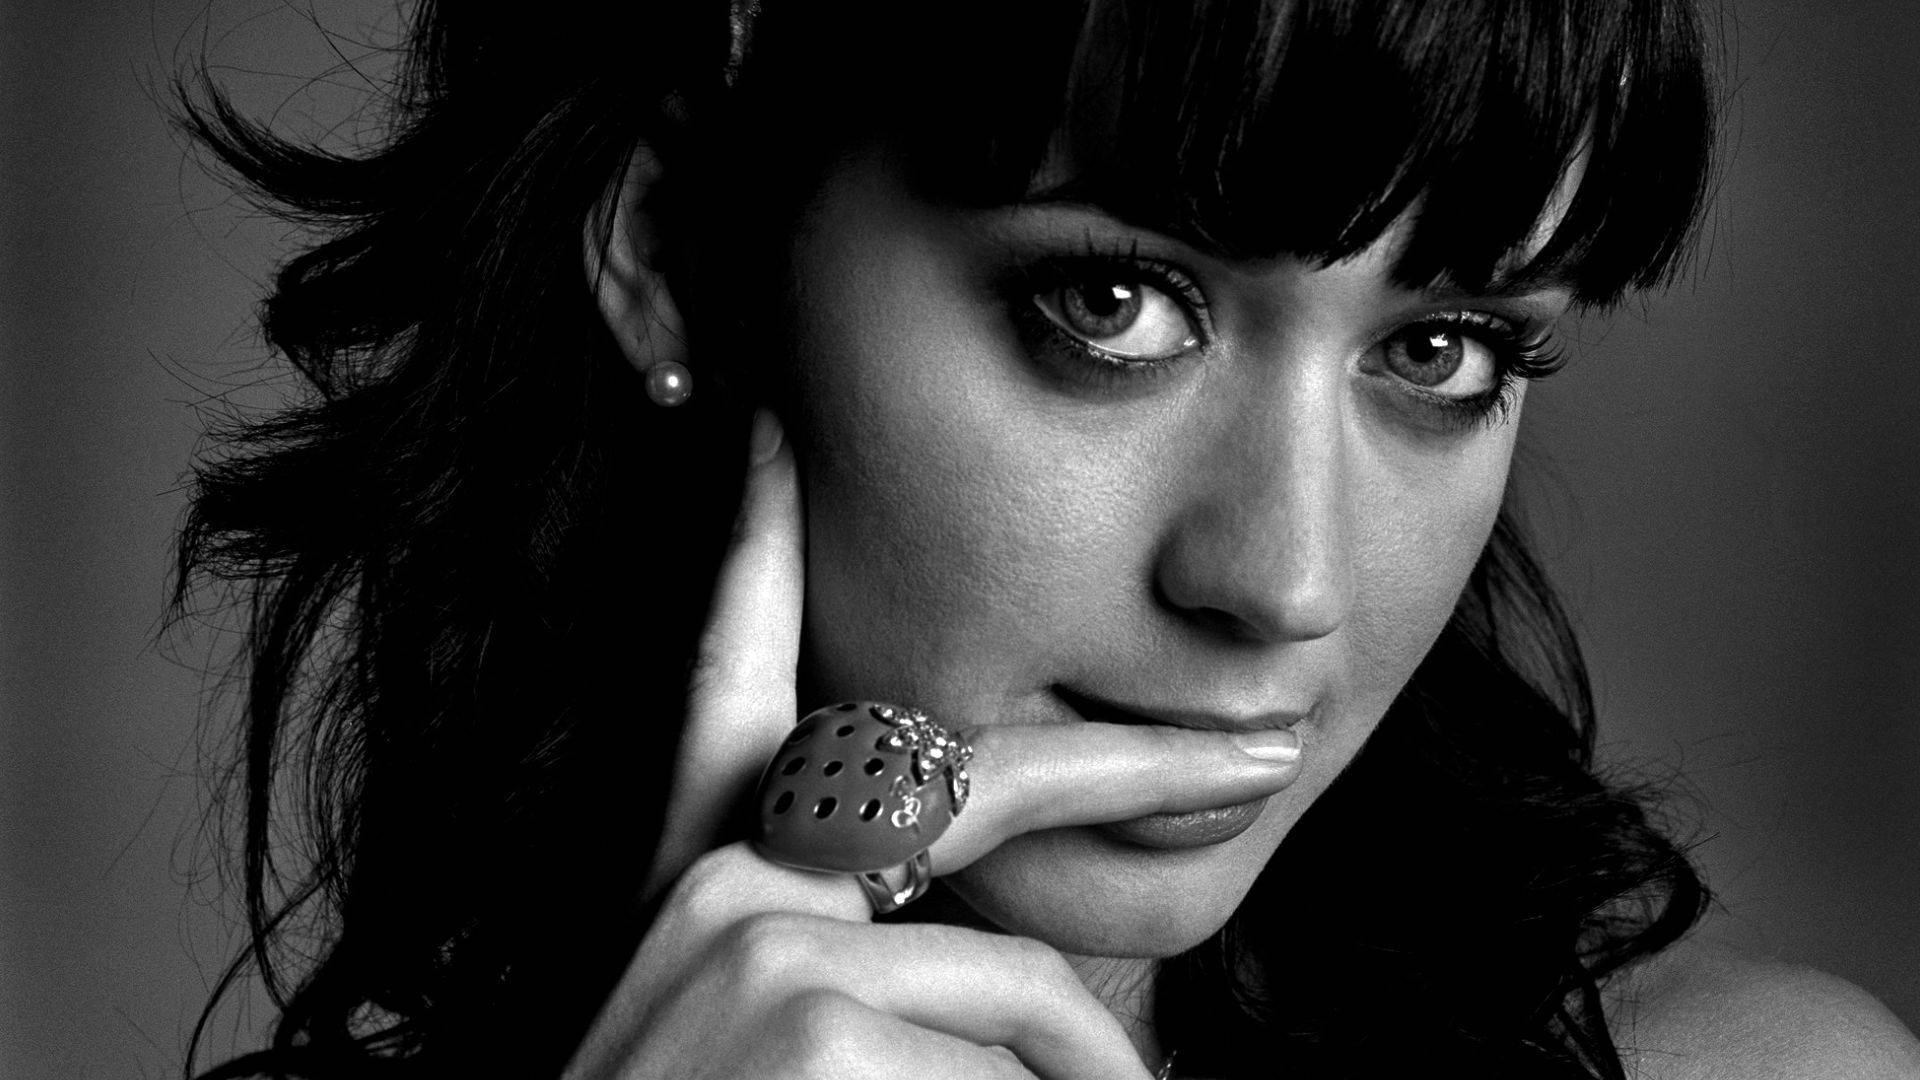 An iconic black and white portrait of singer-songwriter Katy Perry Wallpaper